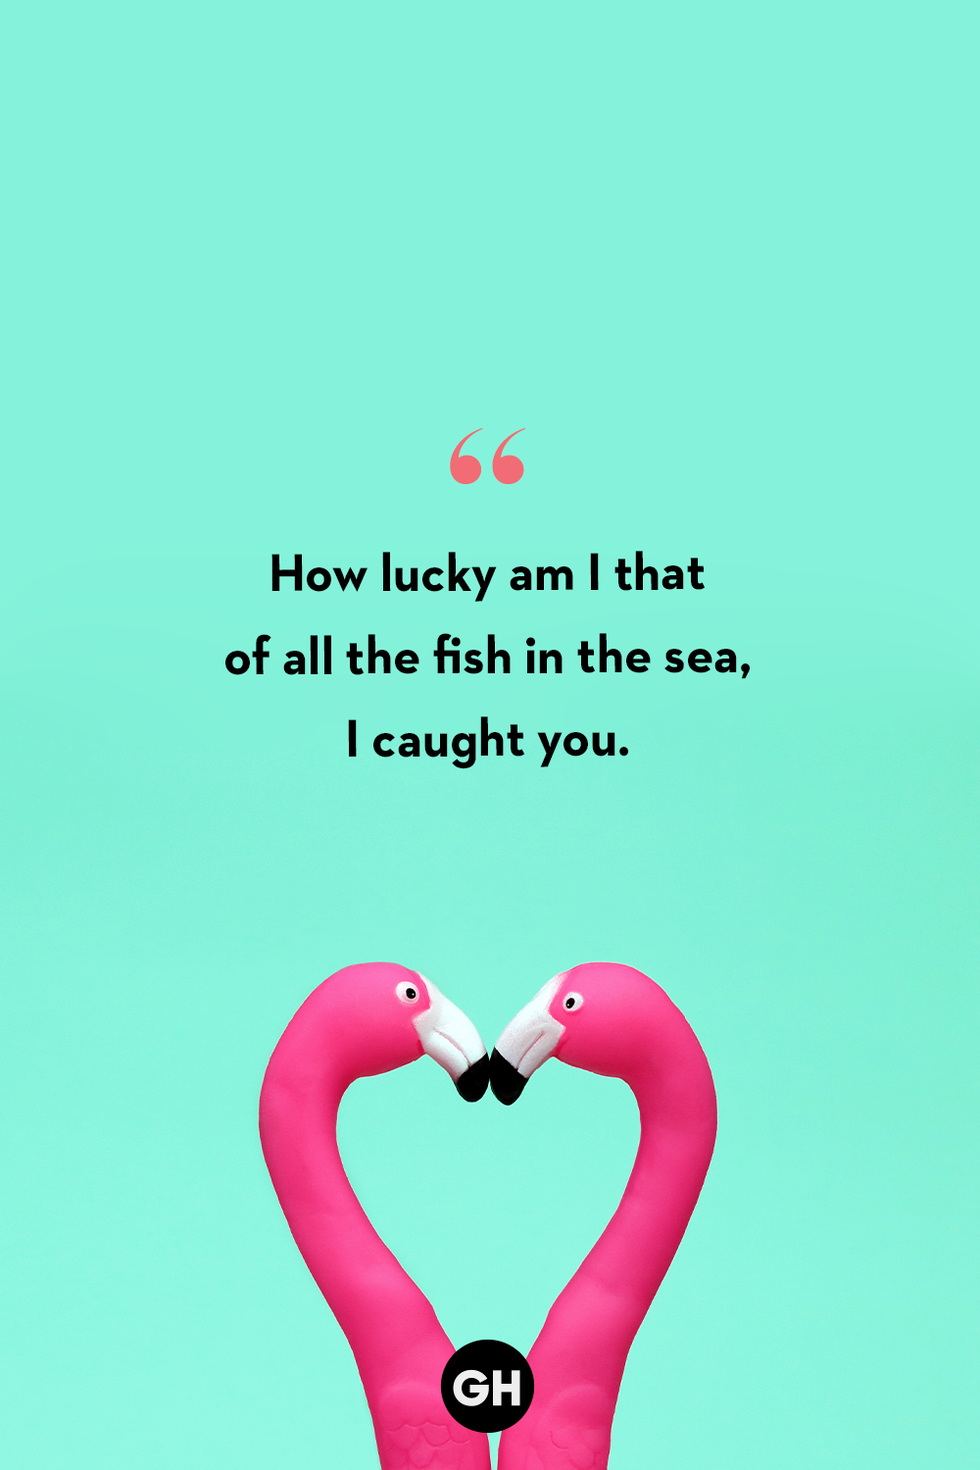 couples quotes for instagram two pink flamingos touching noses on teal background with black text